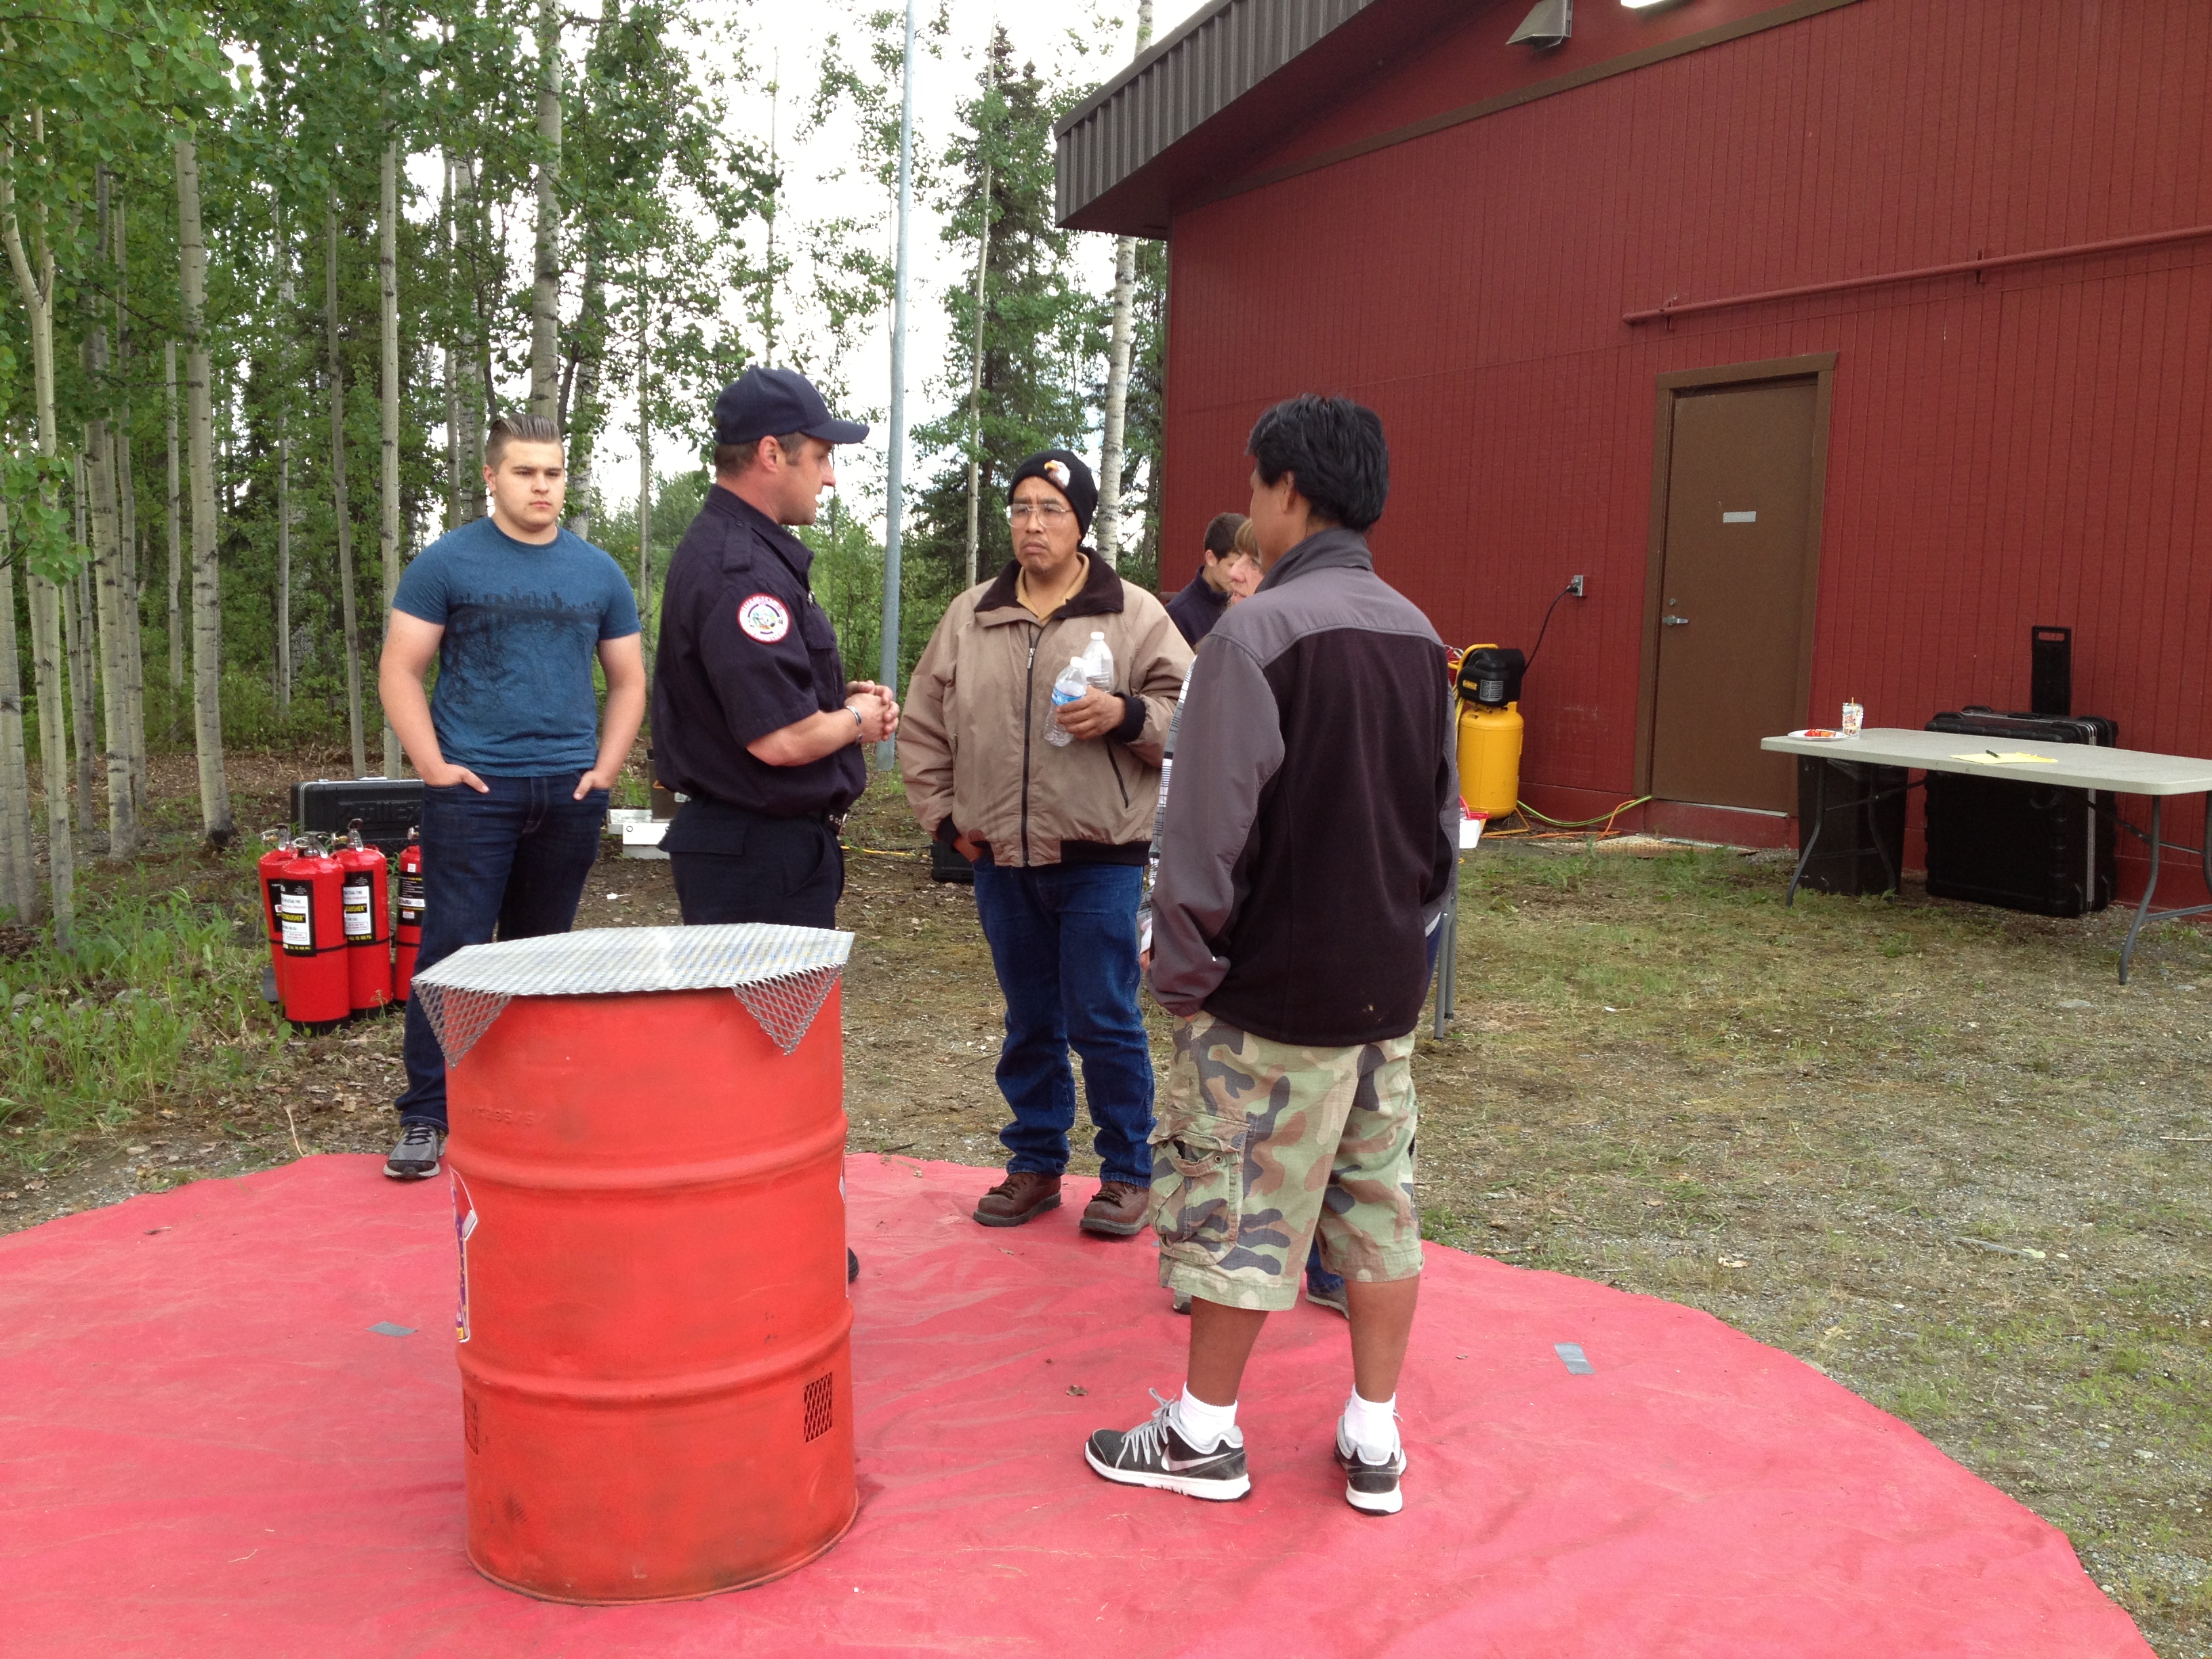  Zach Katzenberger, second from left, a fireman with the West Lakes fire department, exhibits a correct burn barrel setup to onlookers at Big Lake's fire safety event on Saturday. (Photo by Ellen Lockyer, Alaska Public Media - Anchorage)